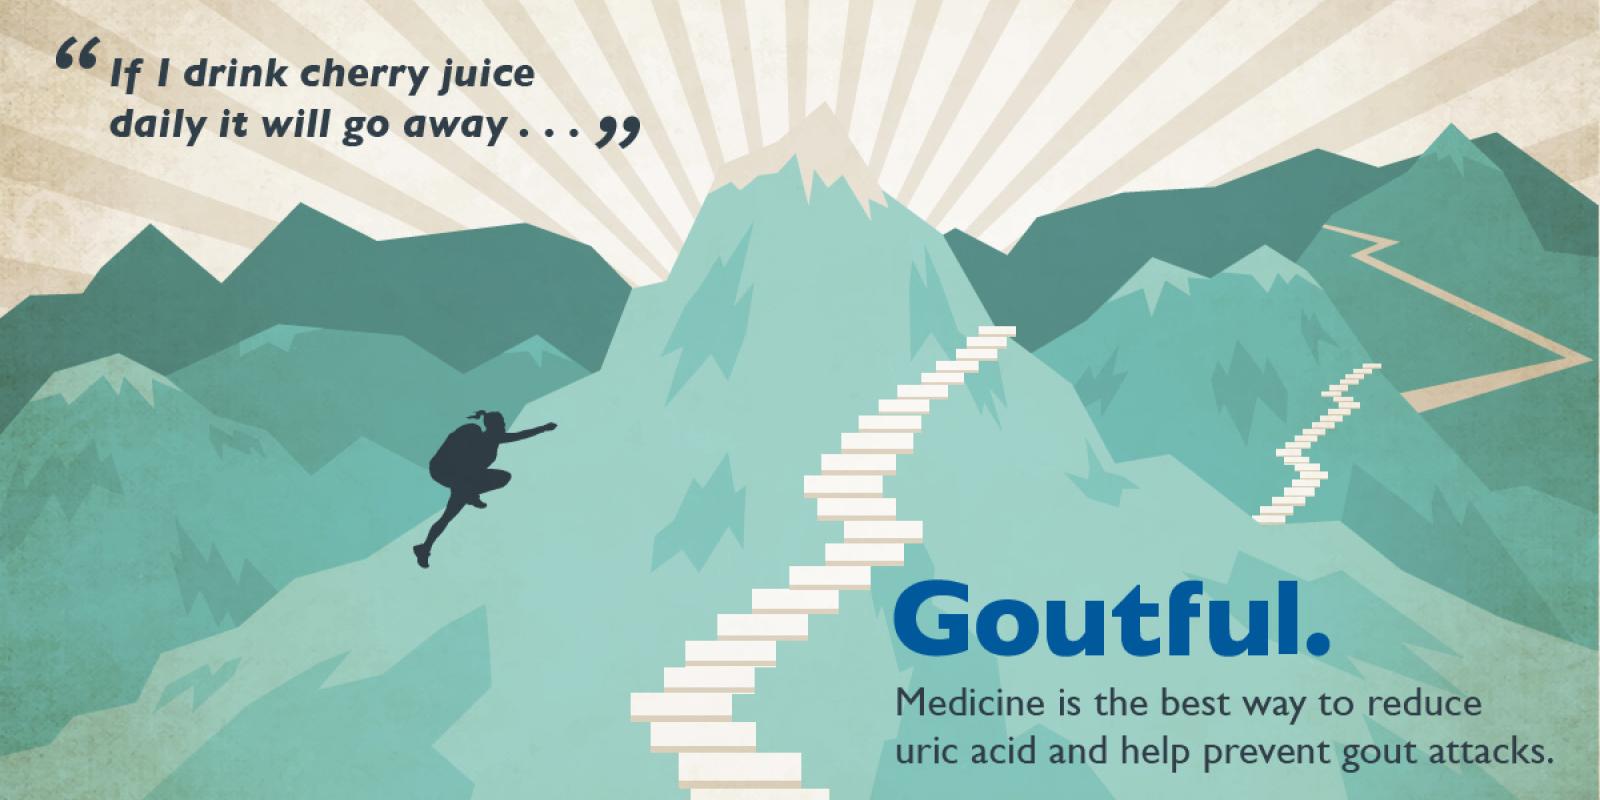 Man climbing mountain to symbolize overcoming myths about gout